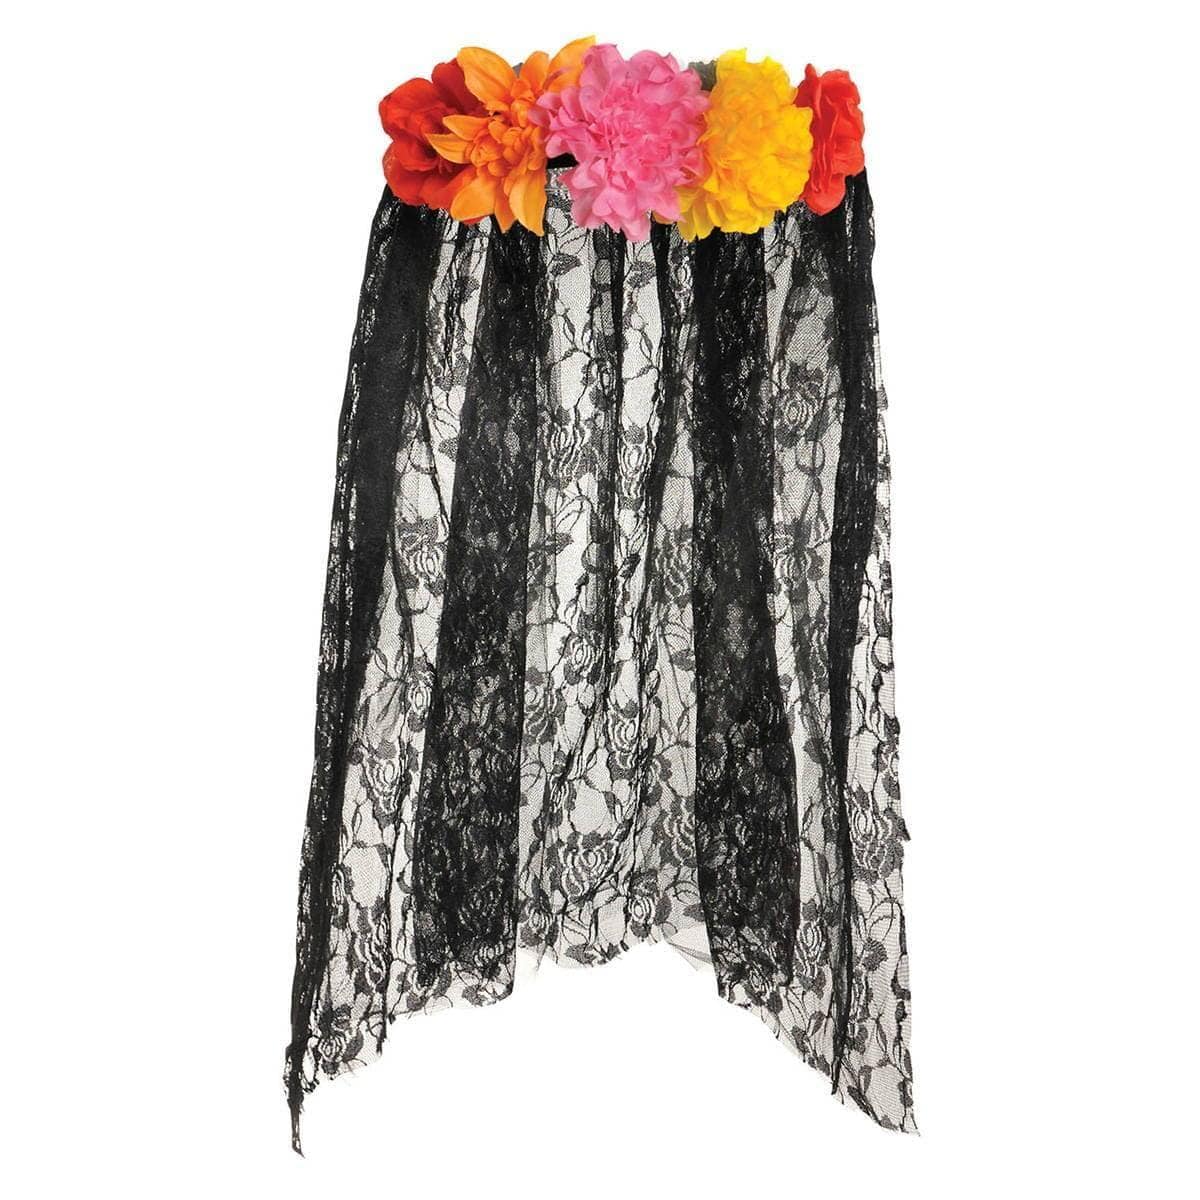 Buy Costume Accessories Day of the dead veil sold at Party Expert